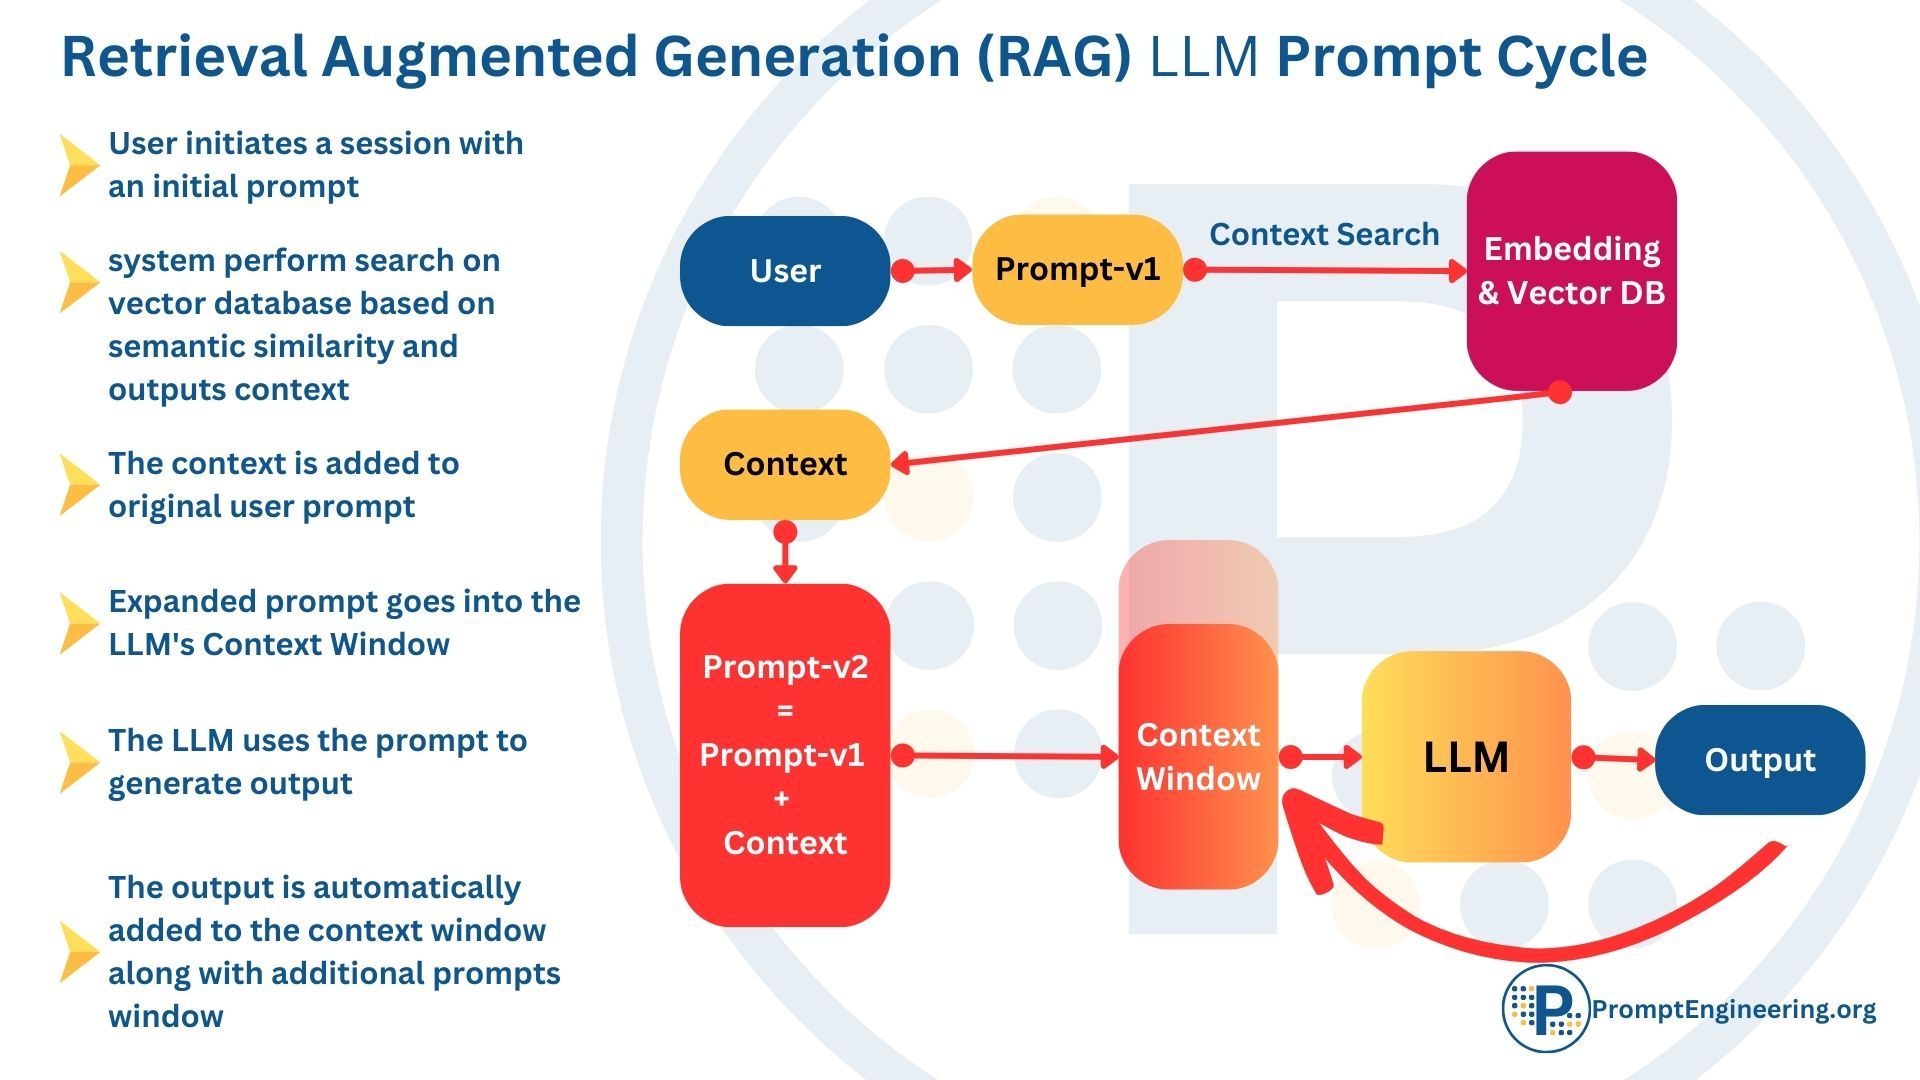 Revolutionizing Search with AI: RAG for Contextual Response